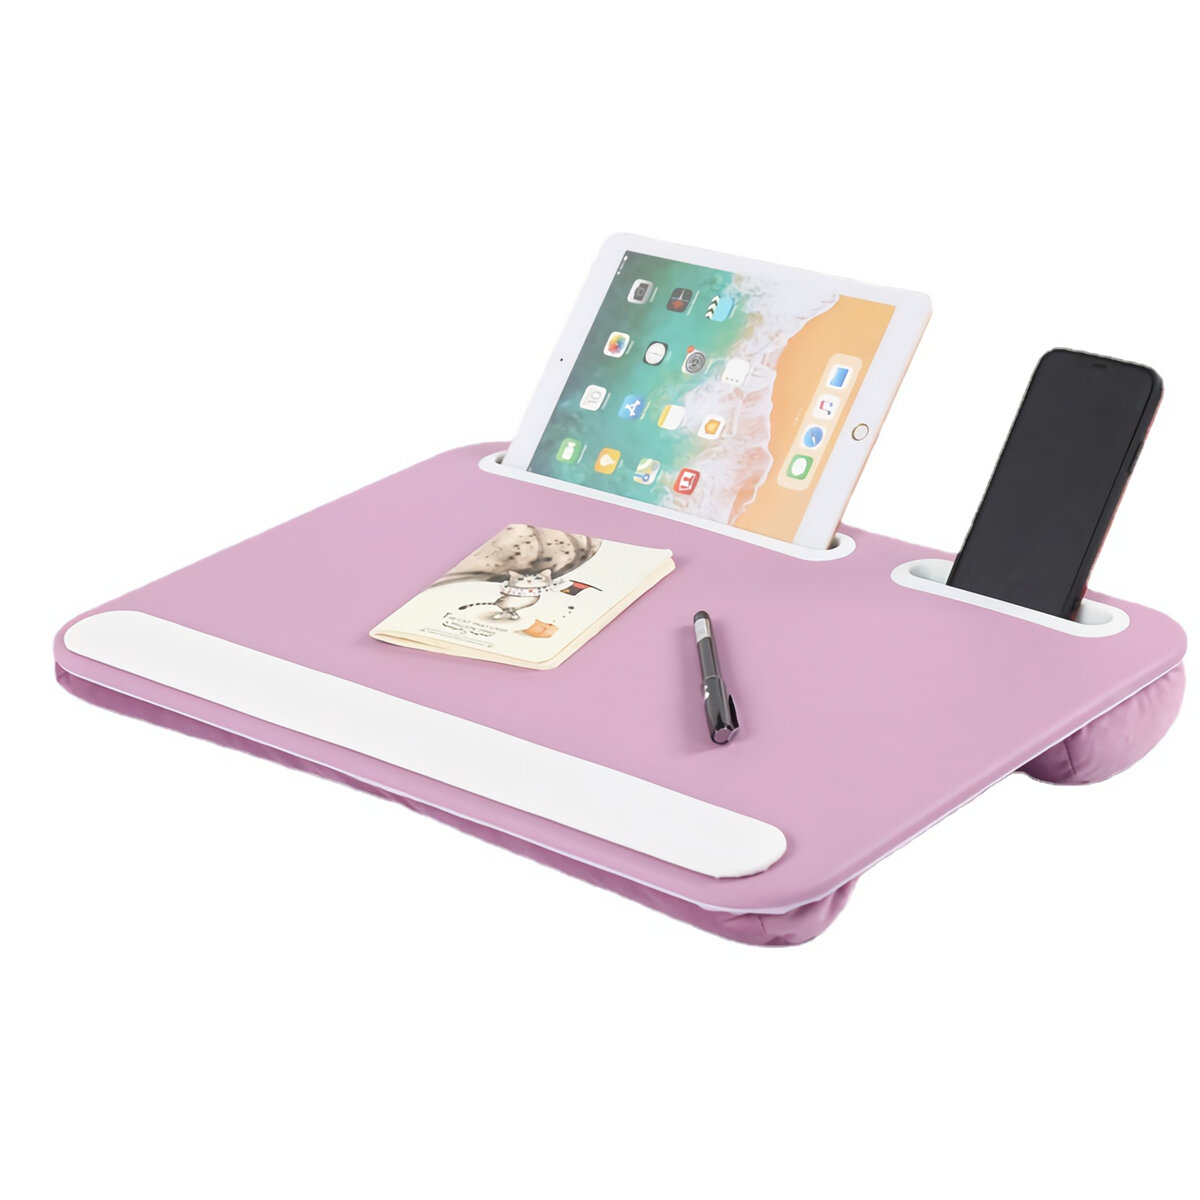 2-in-1 Double Slot Lap Desk Study Pillow Table Computer Laptop Desk Portable Laptop Stand with Phone